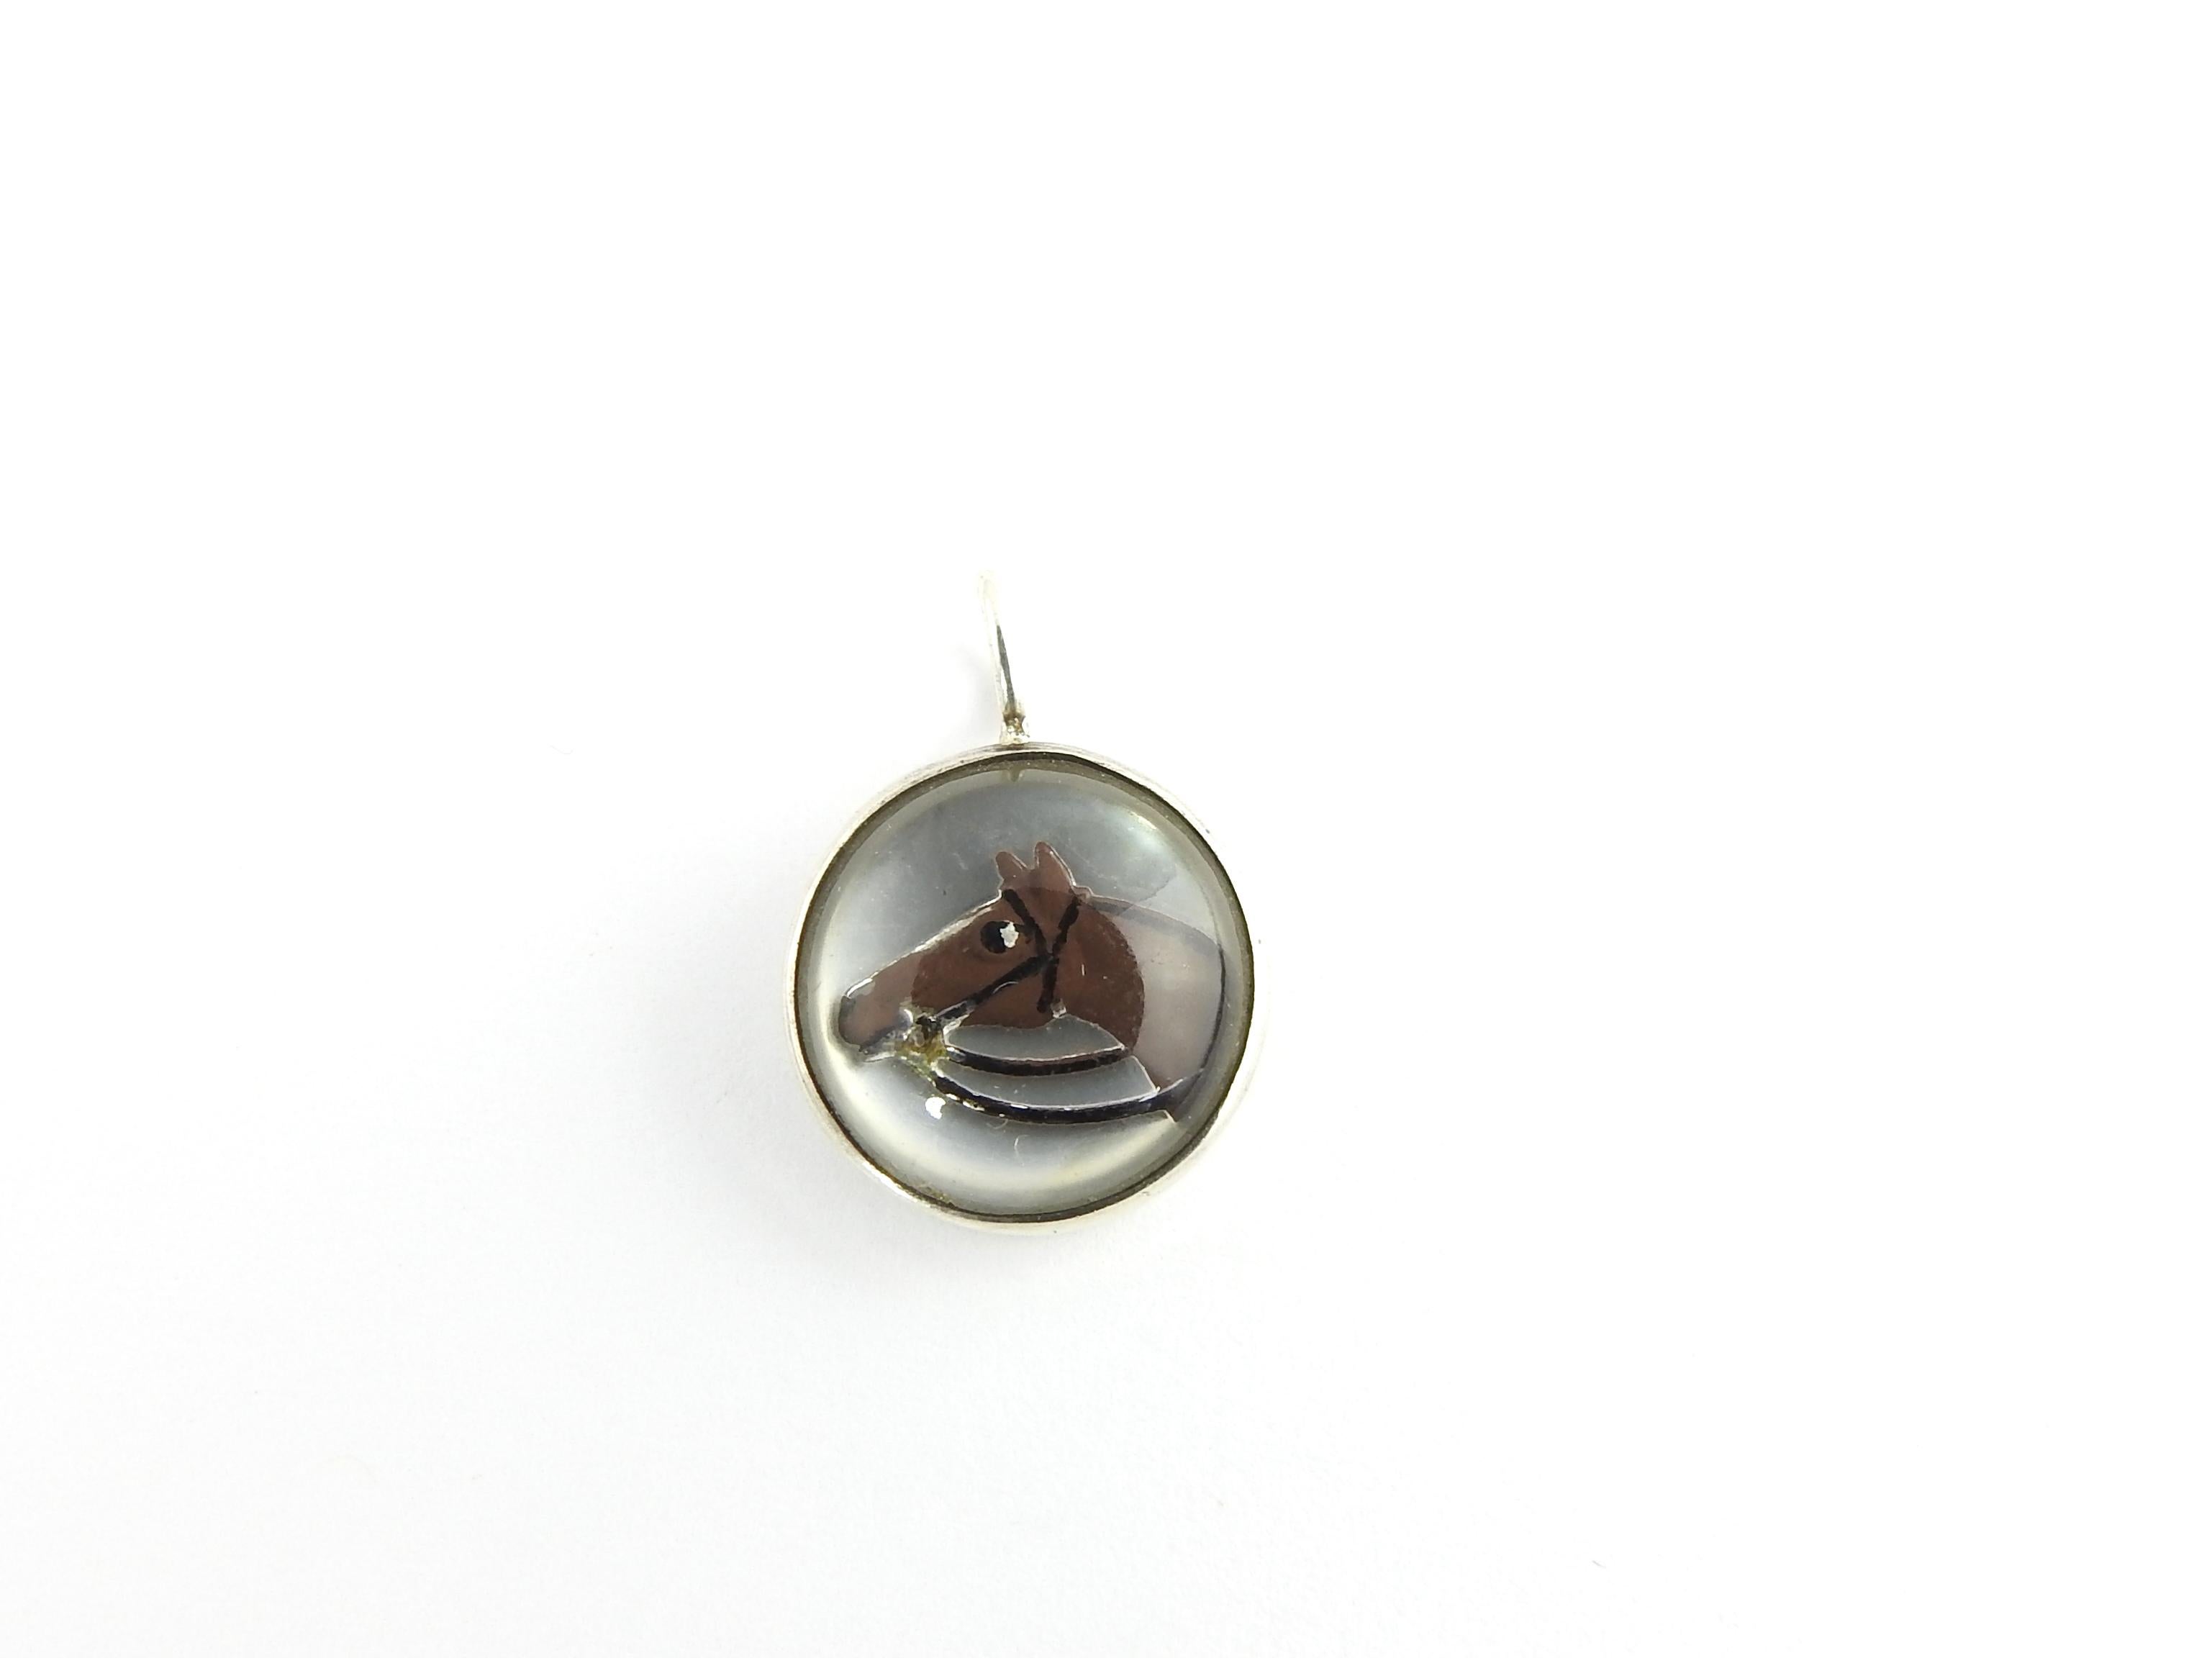 Vintage Sterling Silver Reverse Intaglio Horse Pendant

This lovely pendant features a beautifully detailed horse portrait in reverse Intaglio glass set in sterling silver.

Size: 14 mm

Weight: 1.2 dwt. / 2.0 gr.

Stamped: Sterling

Very good